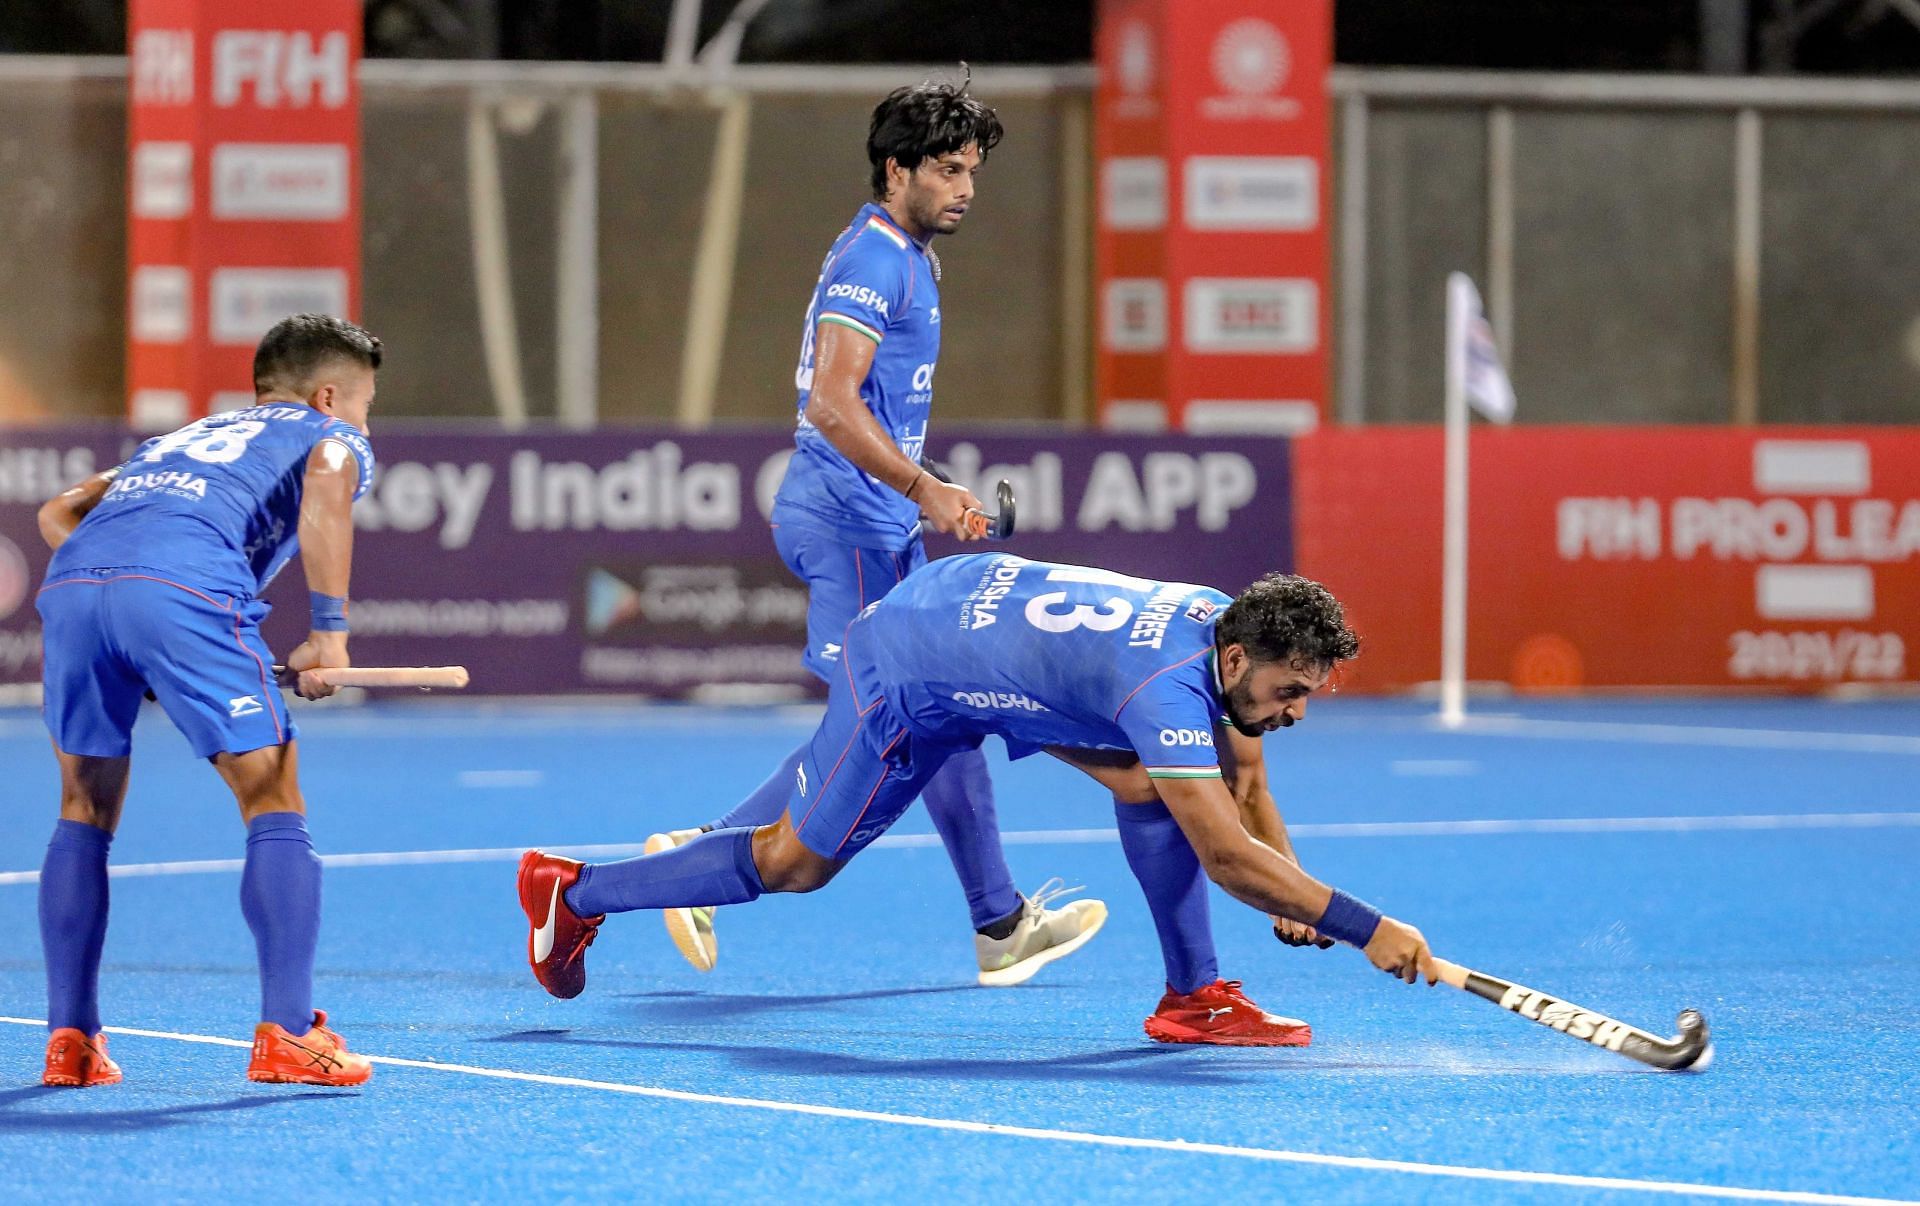 India&#039;s Harmanpreet Singh scores a goal against Germany in their FIH Pro League match. (PC: HI)